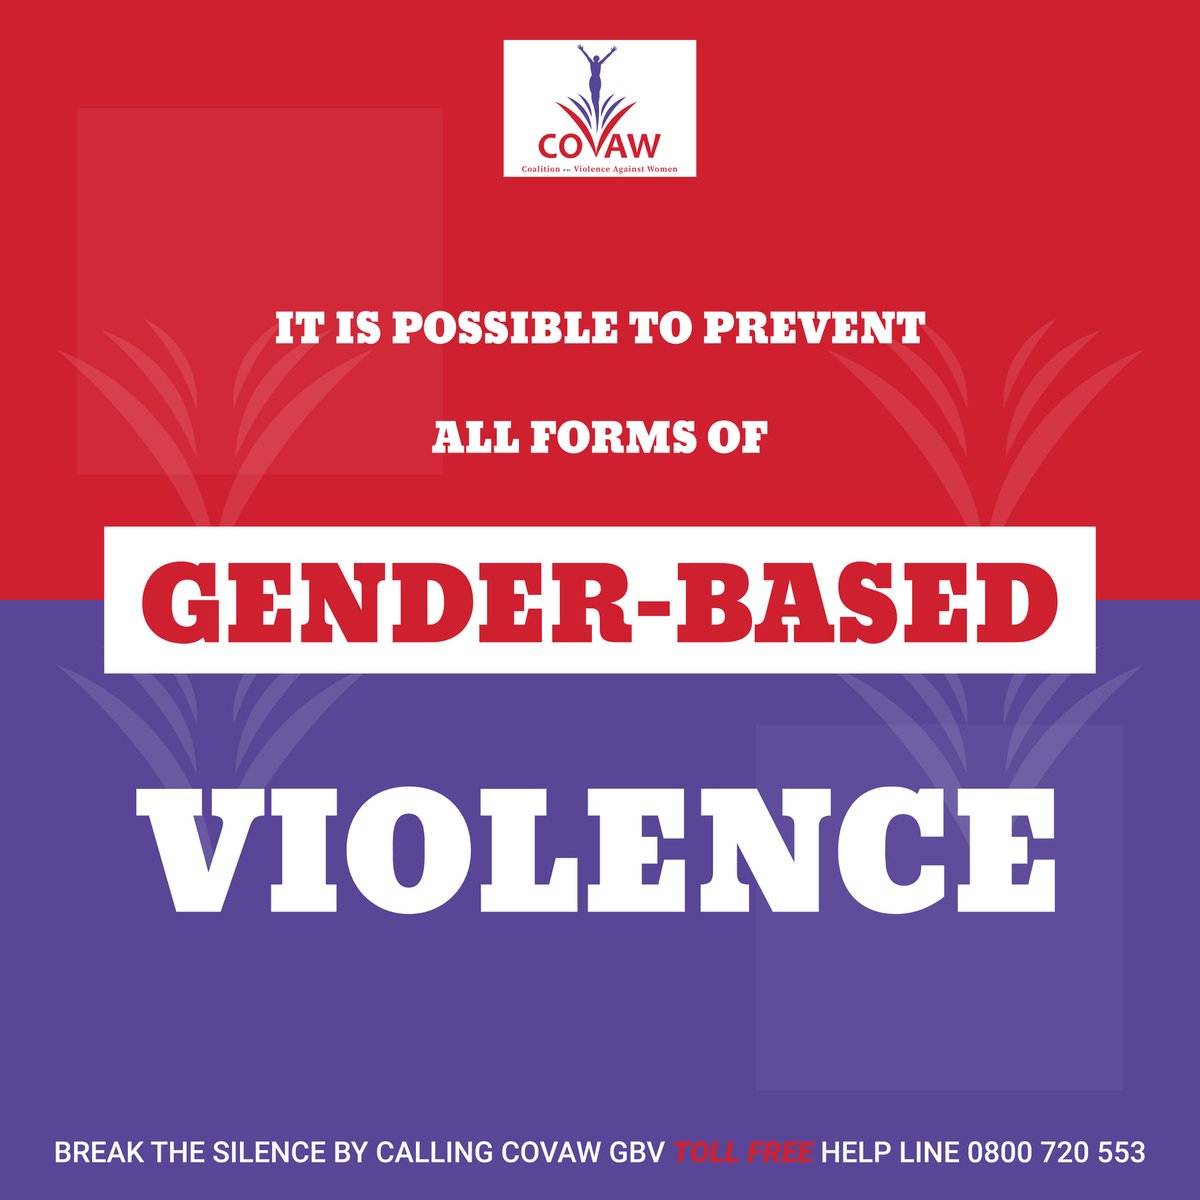 Research shows that 38% women have experienced online violence. Women are learning to accept violence as a normal part of their online experience. Technology-enabled GBV is a violation of human rights & should be included in legislation that criminalizes all types of violence.